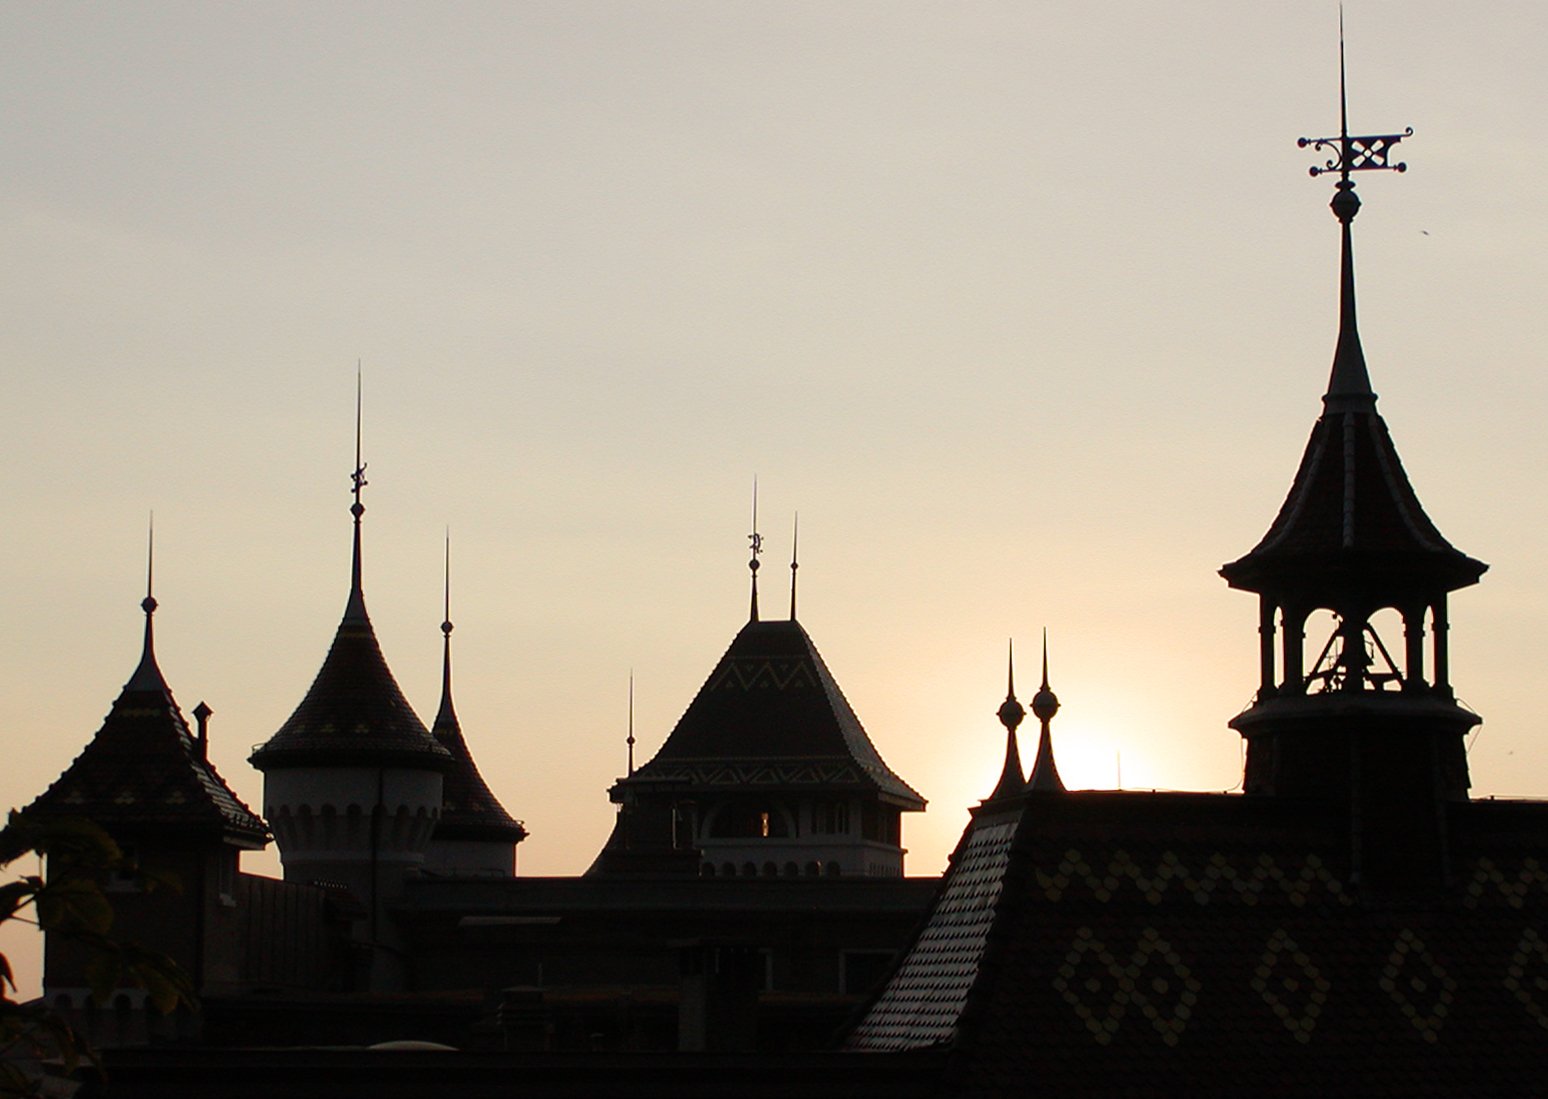 a castle with turrets and spires is silhouetted against the sky